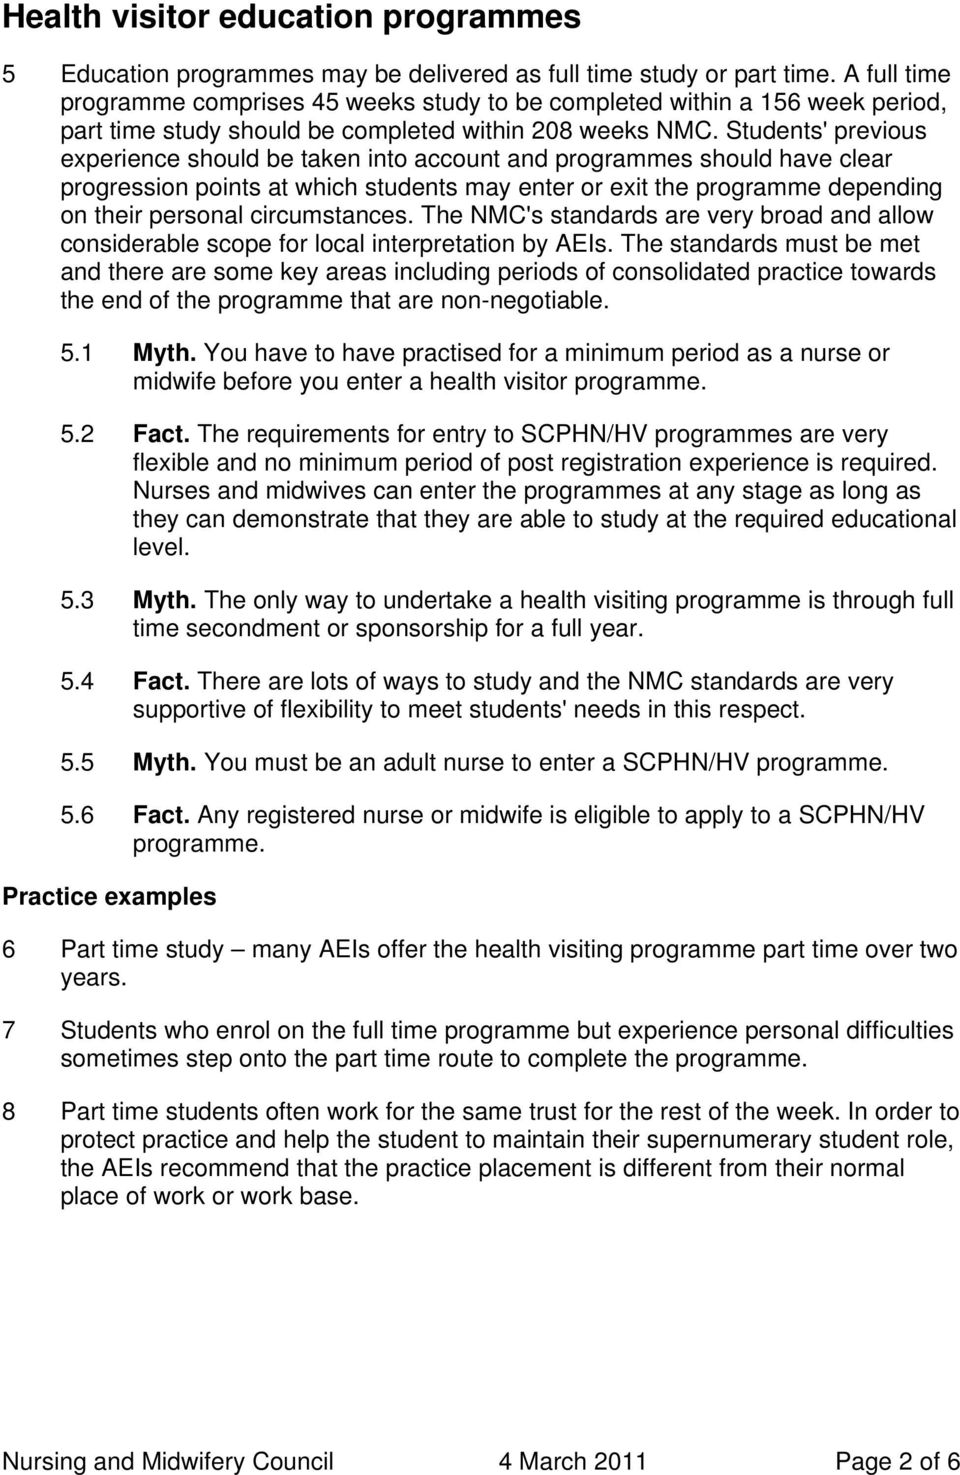 Students' previous experience should be taken into account and programmes should have clear progression points at which students may enter or exit the programme depending on their personal